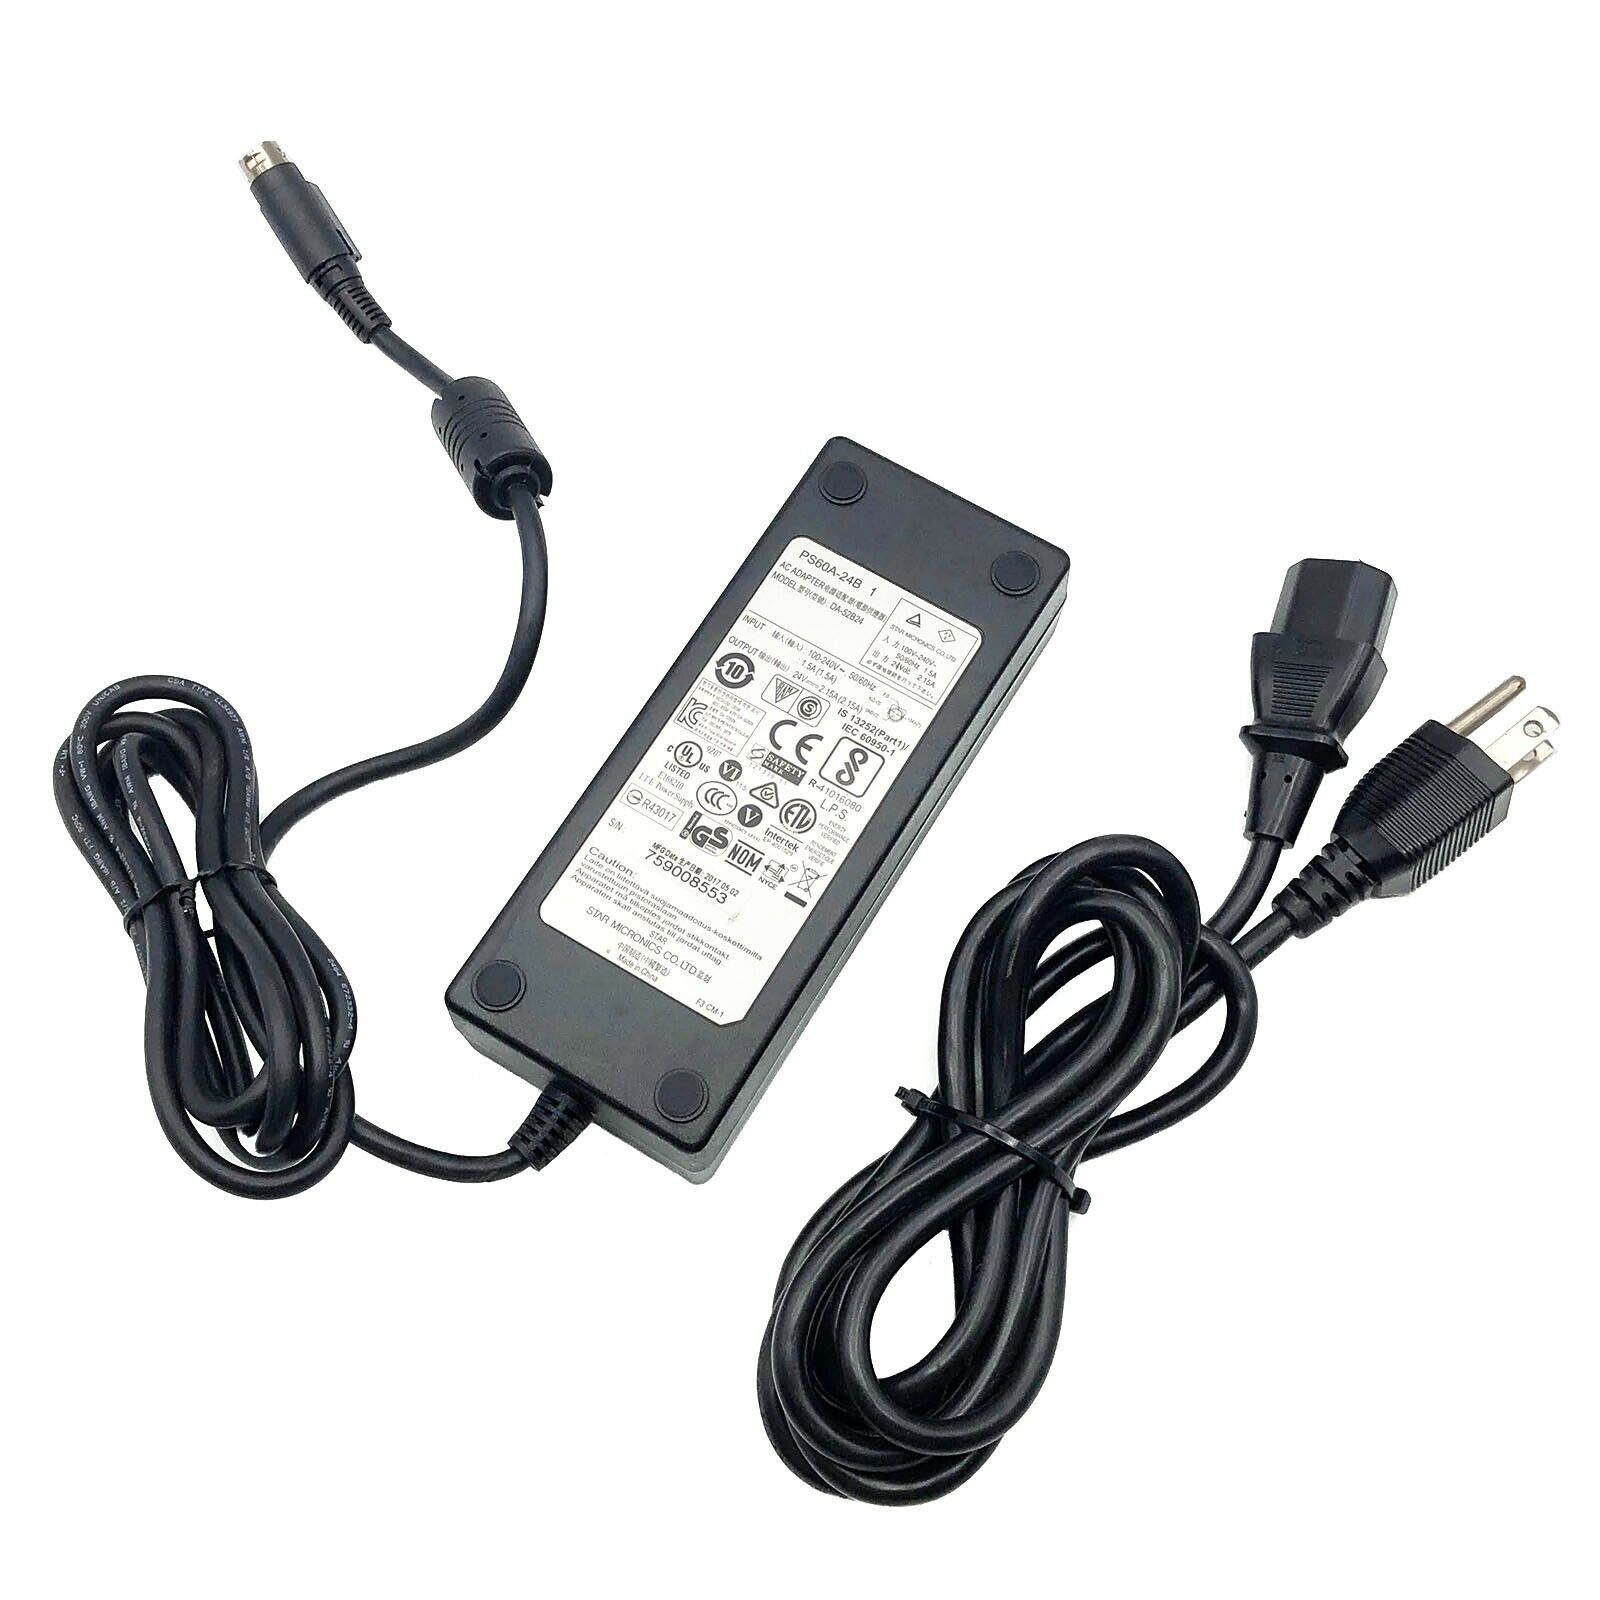 Original AC Power Adapter for Sony UP-D711MD Digital Graphic Printer